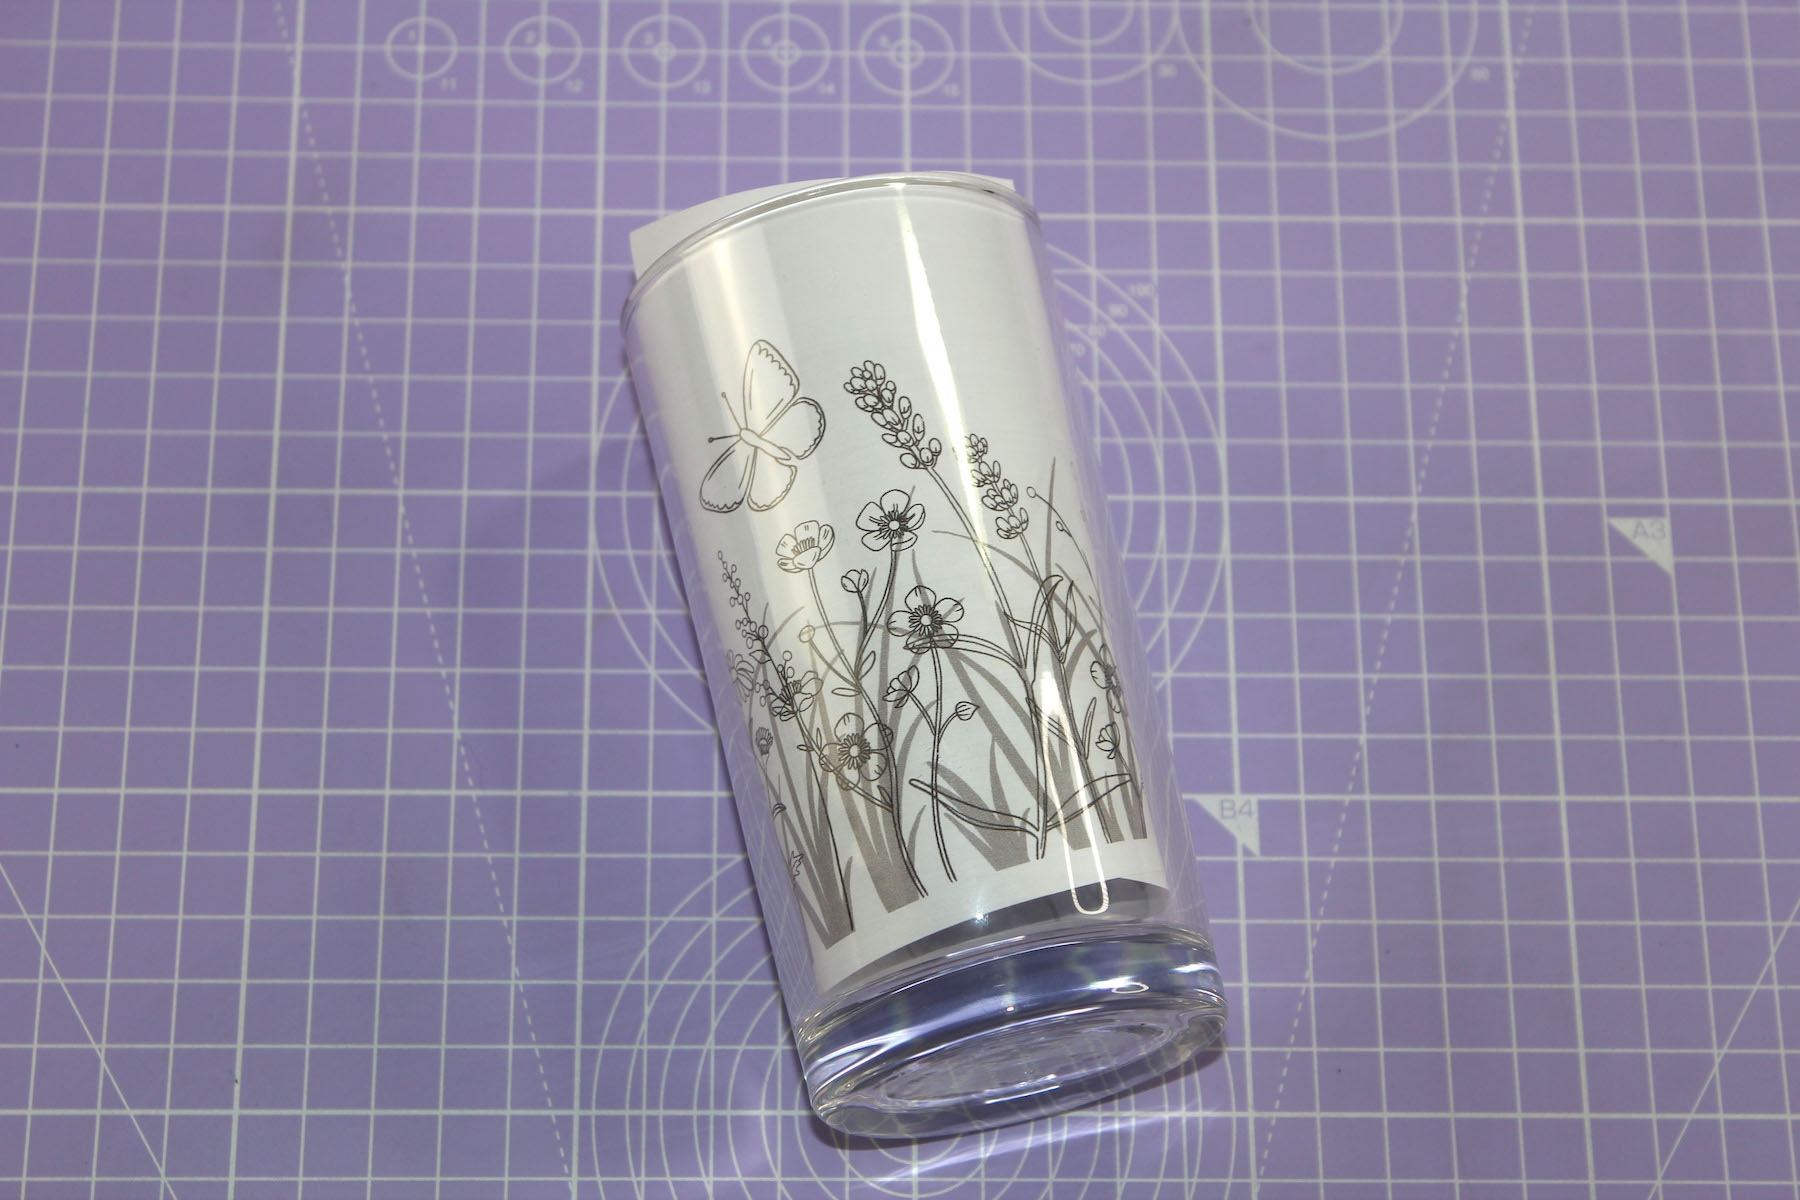 Glass painting tutorial – step 3